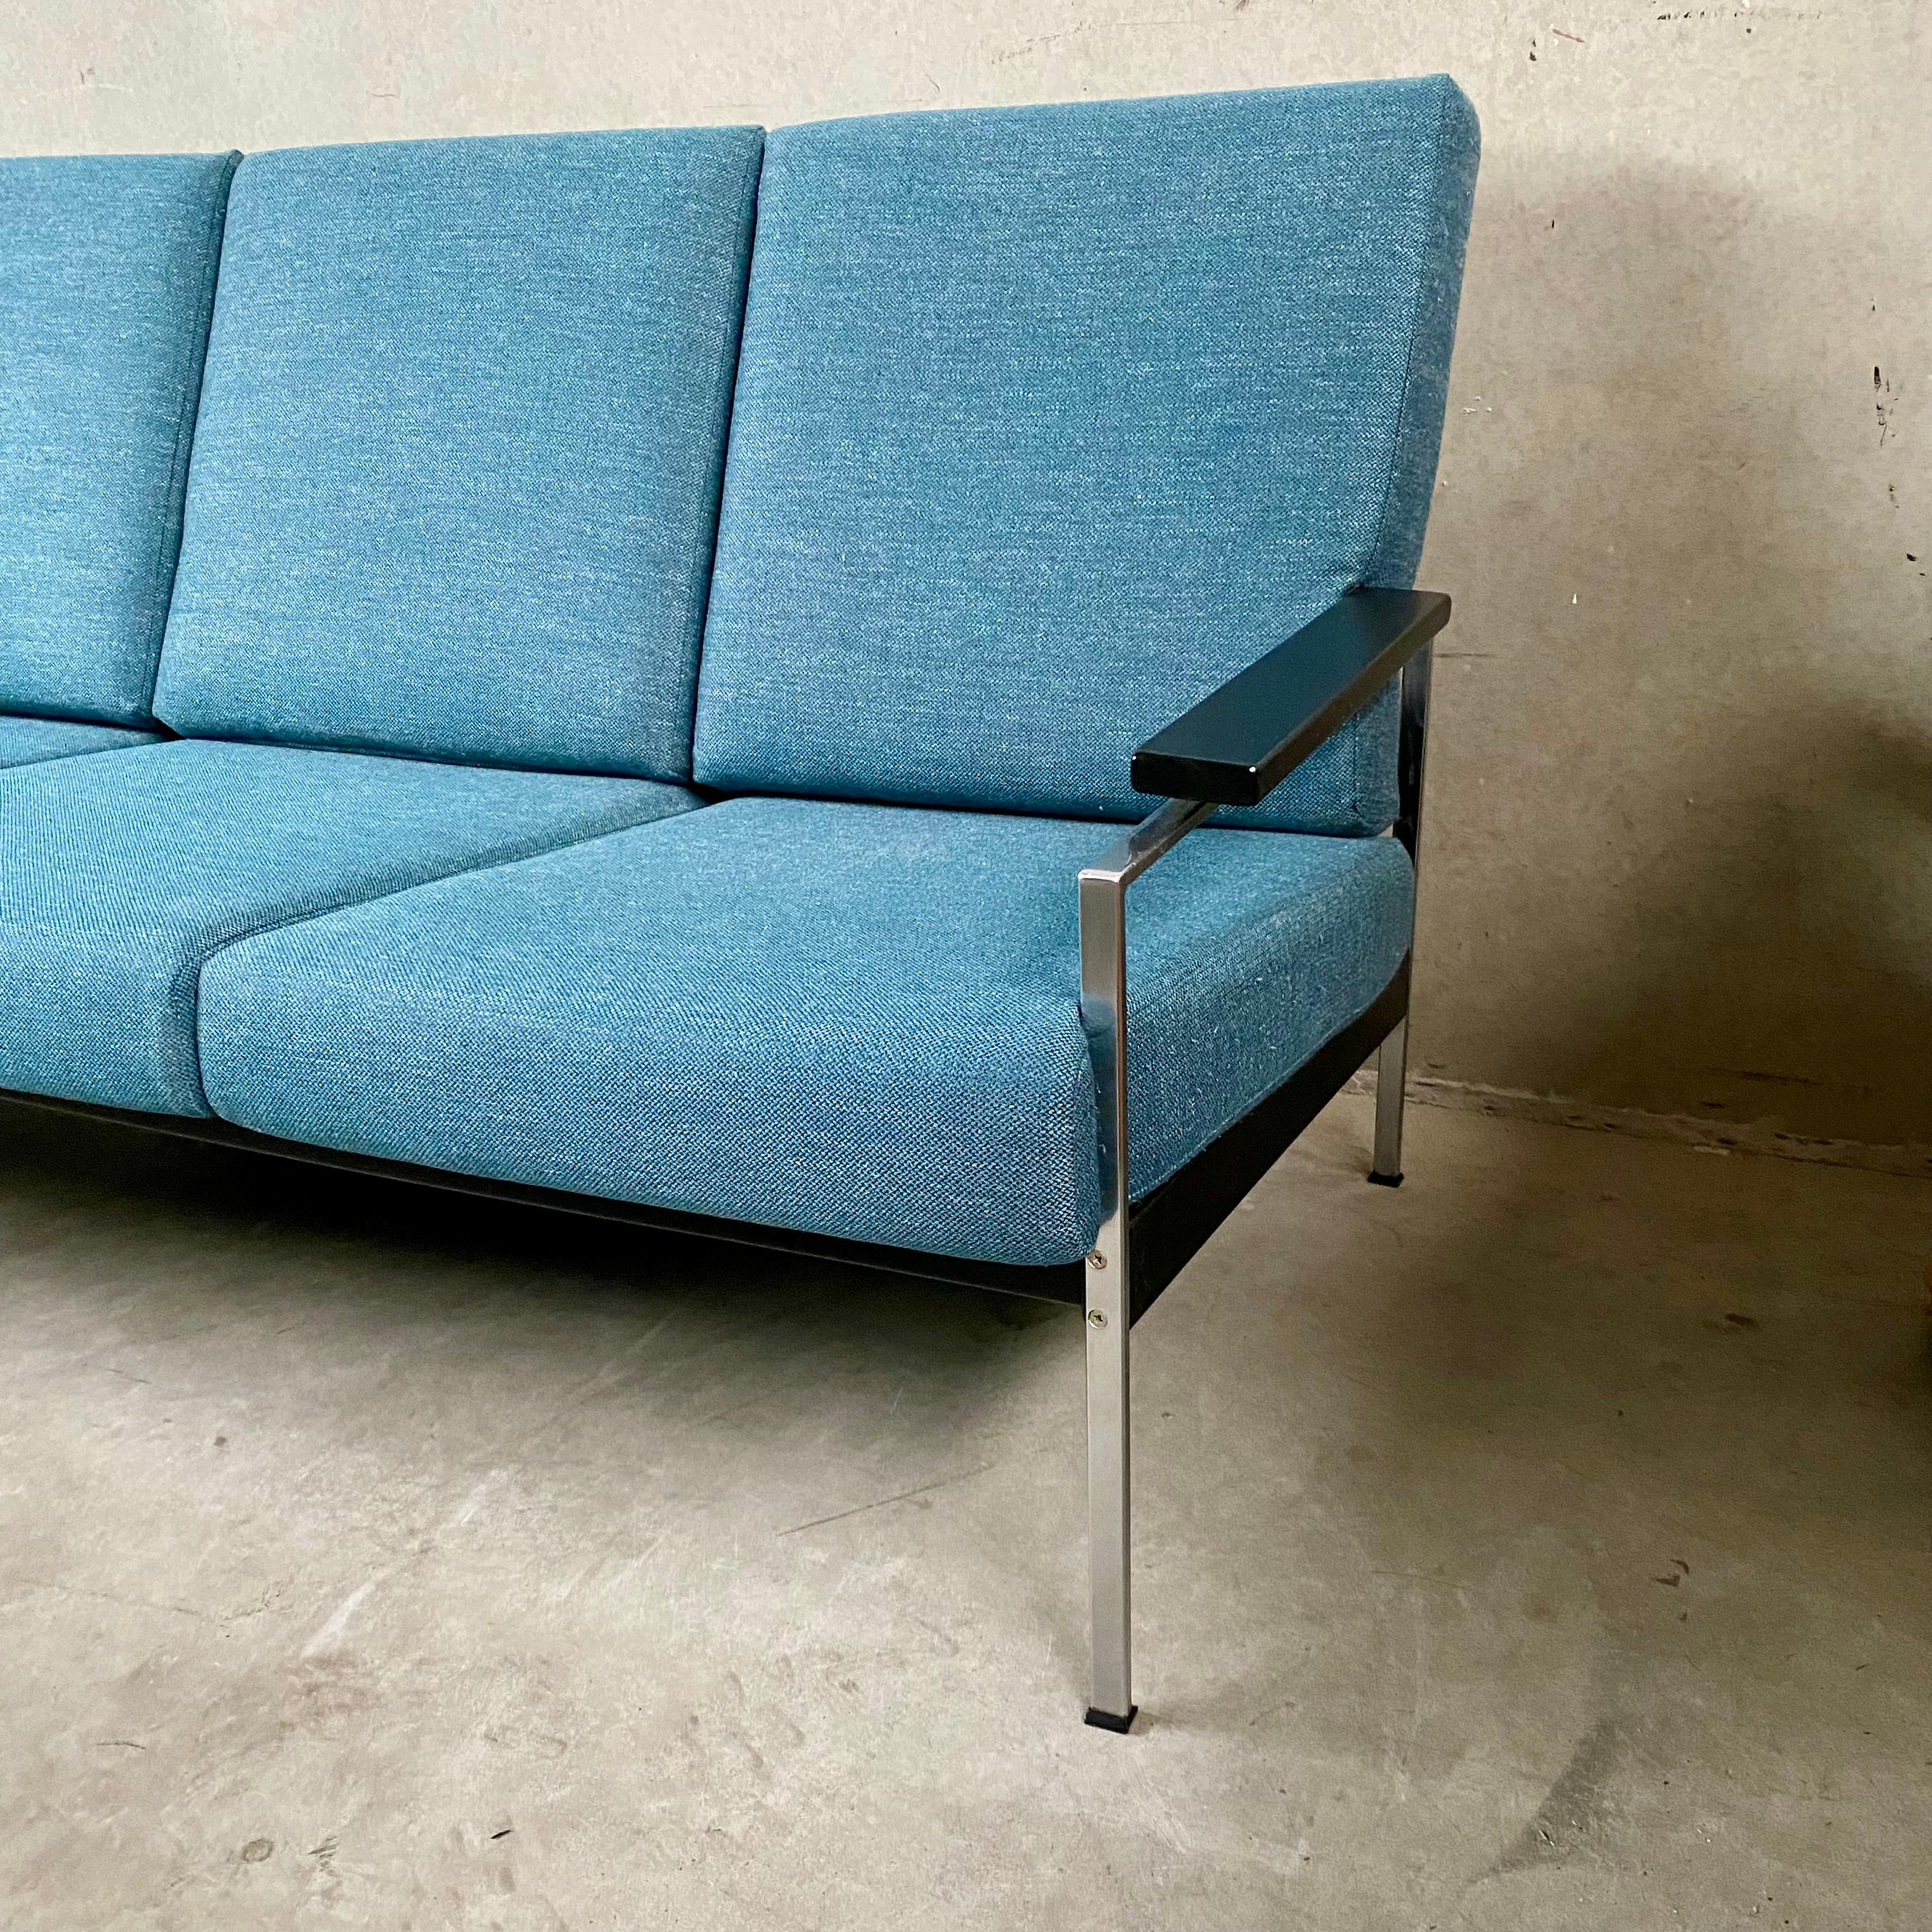 3-seater Sofa by Rob Parry for Gelderland, Netherlands 1970 For Sale 3